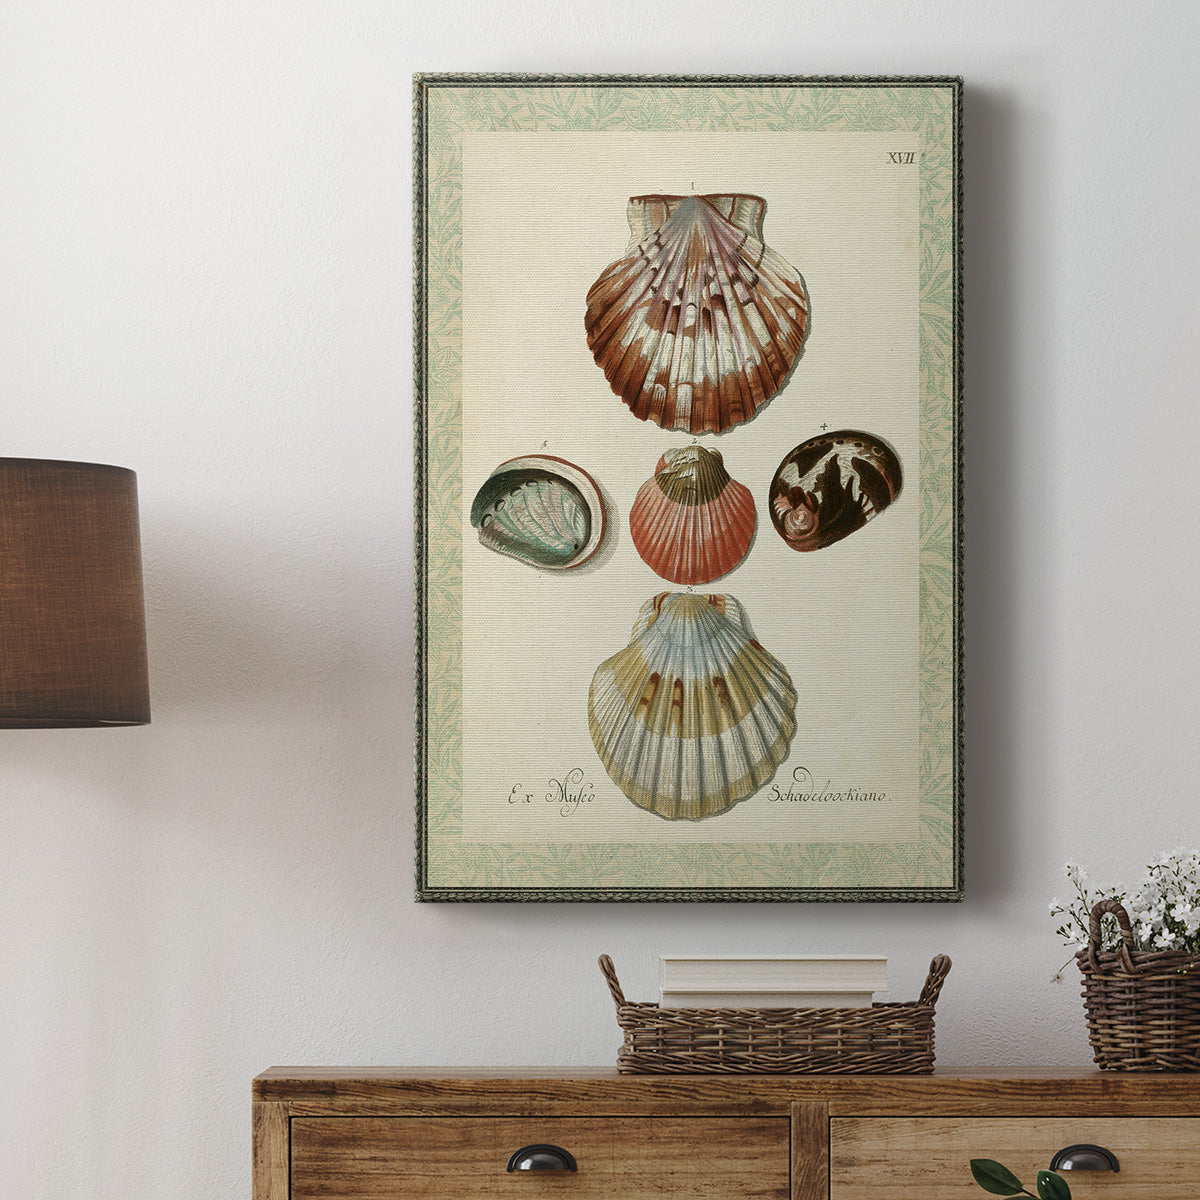 Bookplate Shells III Premium Gallery Wrapped Canvas - Ready to Hang